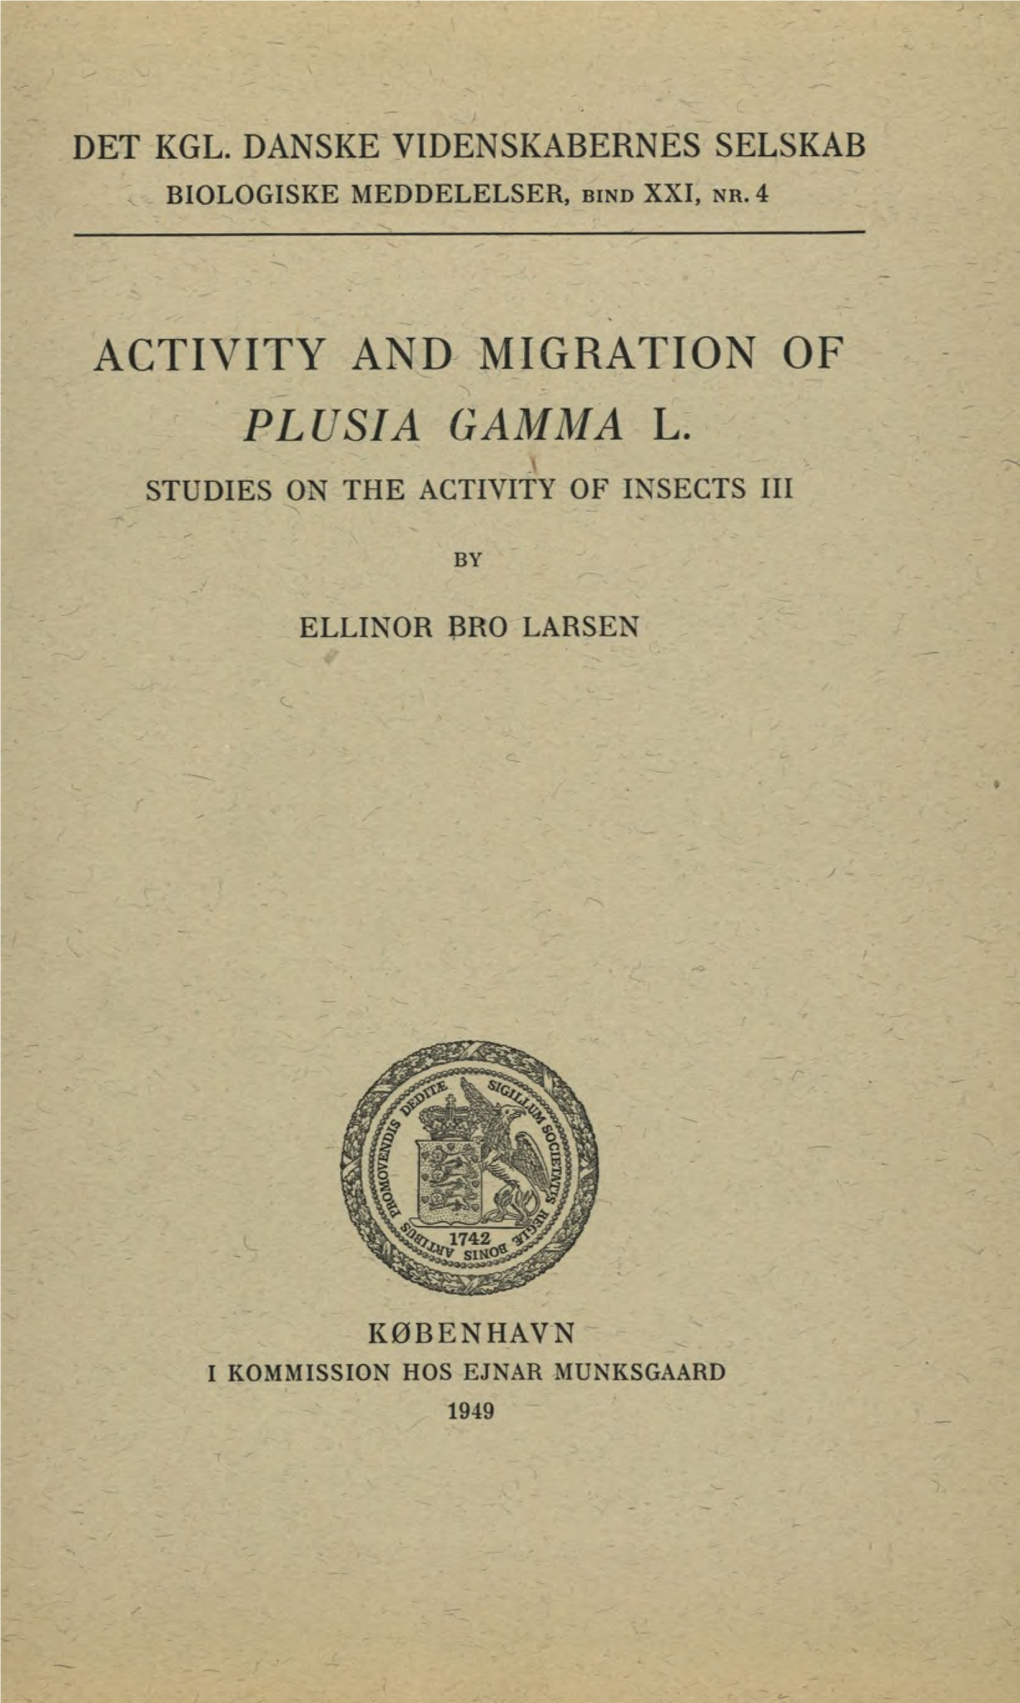 Plusia Gamma L. a ' Studies on the Activity of Insects Iii by Ellinor Bro Larsen